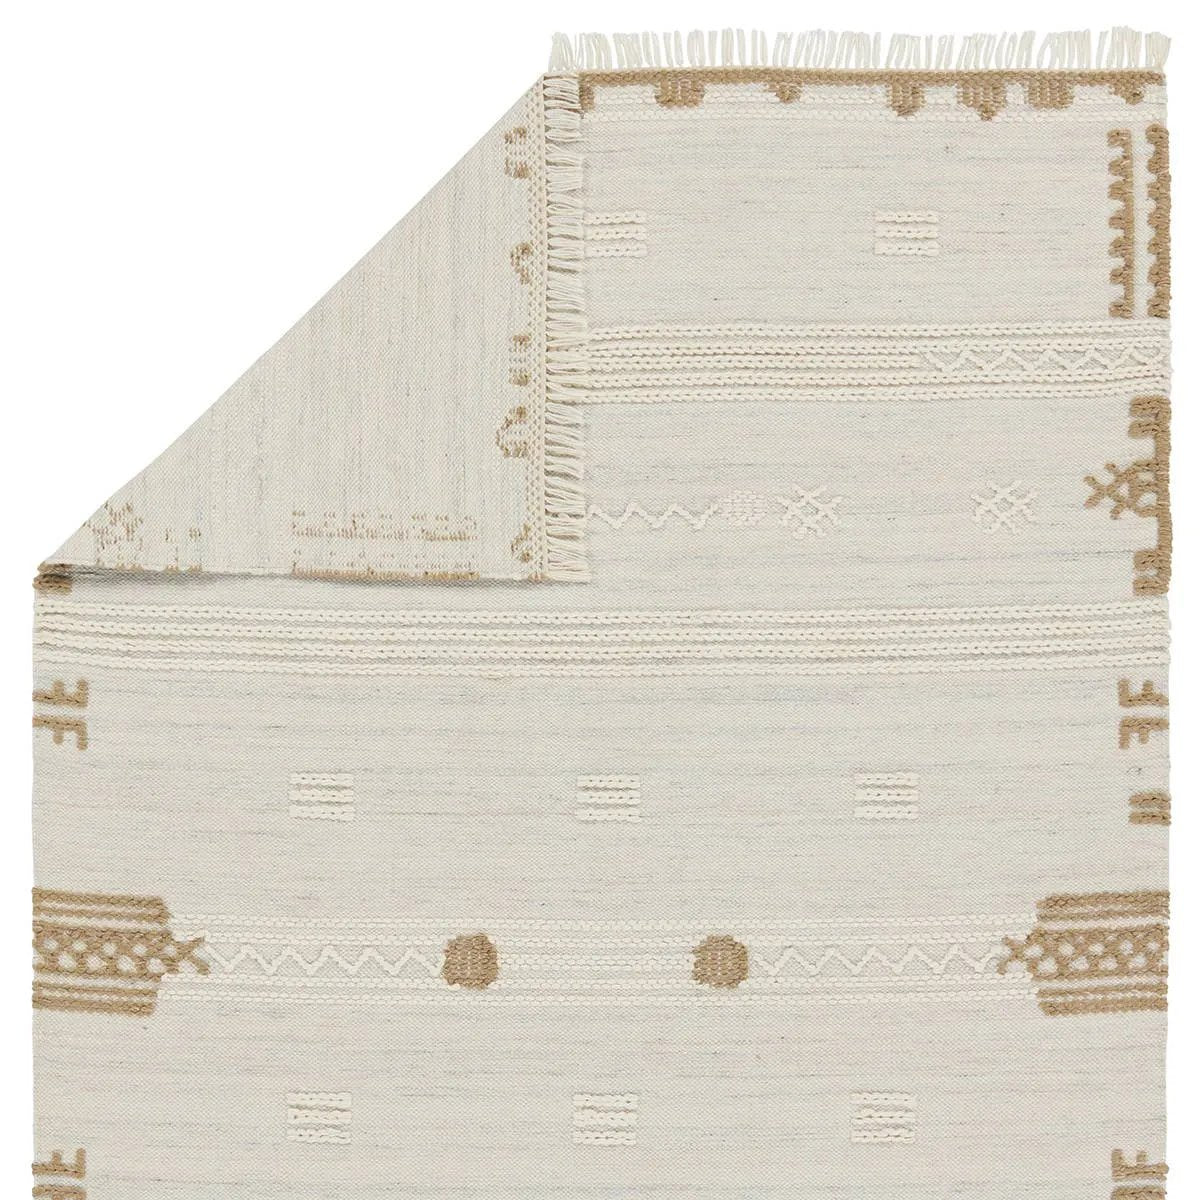 The Revelry collection marries global modernity with durable, performance fibers. The light and airy Noble area rug boasts a captivating, tribal stripe design in a stunning ivory, brown, cream, gray, and black colorway. Amethyst Home provides interior design, new home construction design consulting, vintage area rugs, and lighting in the Charlotte metro area.